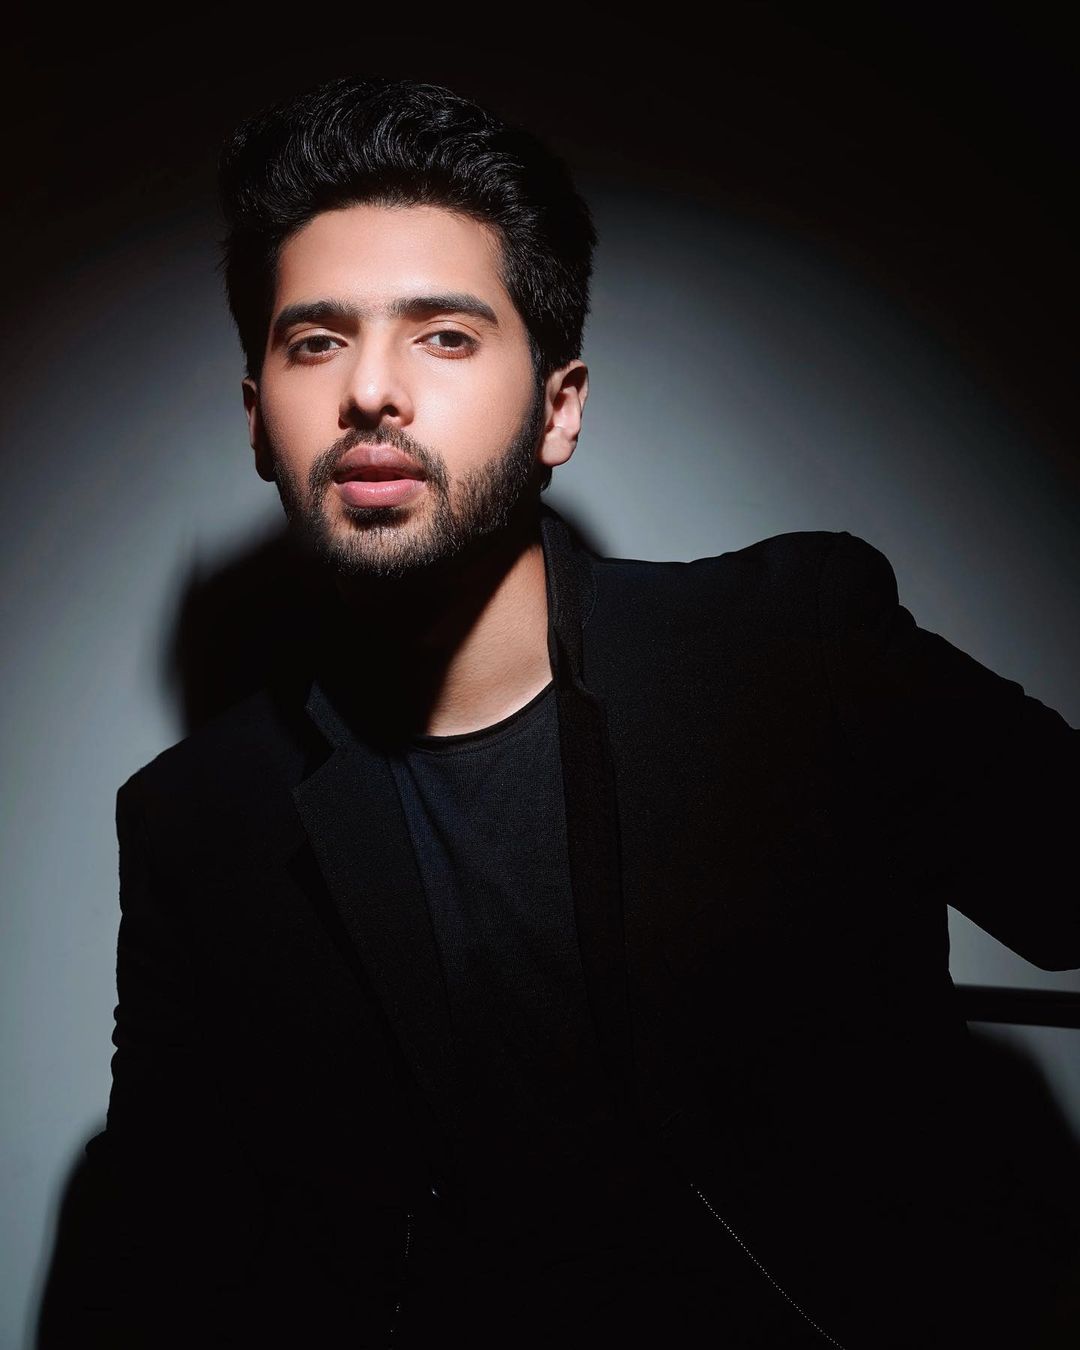 Armaan Malik Nude Porn Pics Showing His Cock - On the special occasion of Armaan Malik's 26th birthday, Let's take a peek  at some unknown facts about him. - News Leak Centre